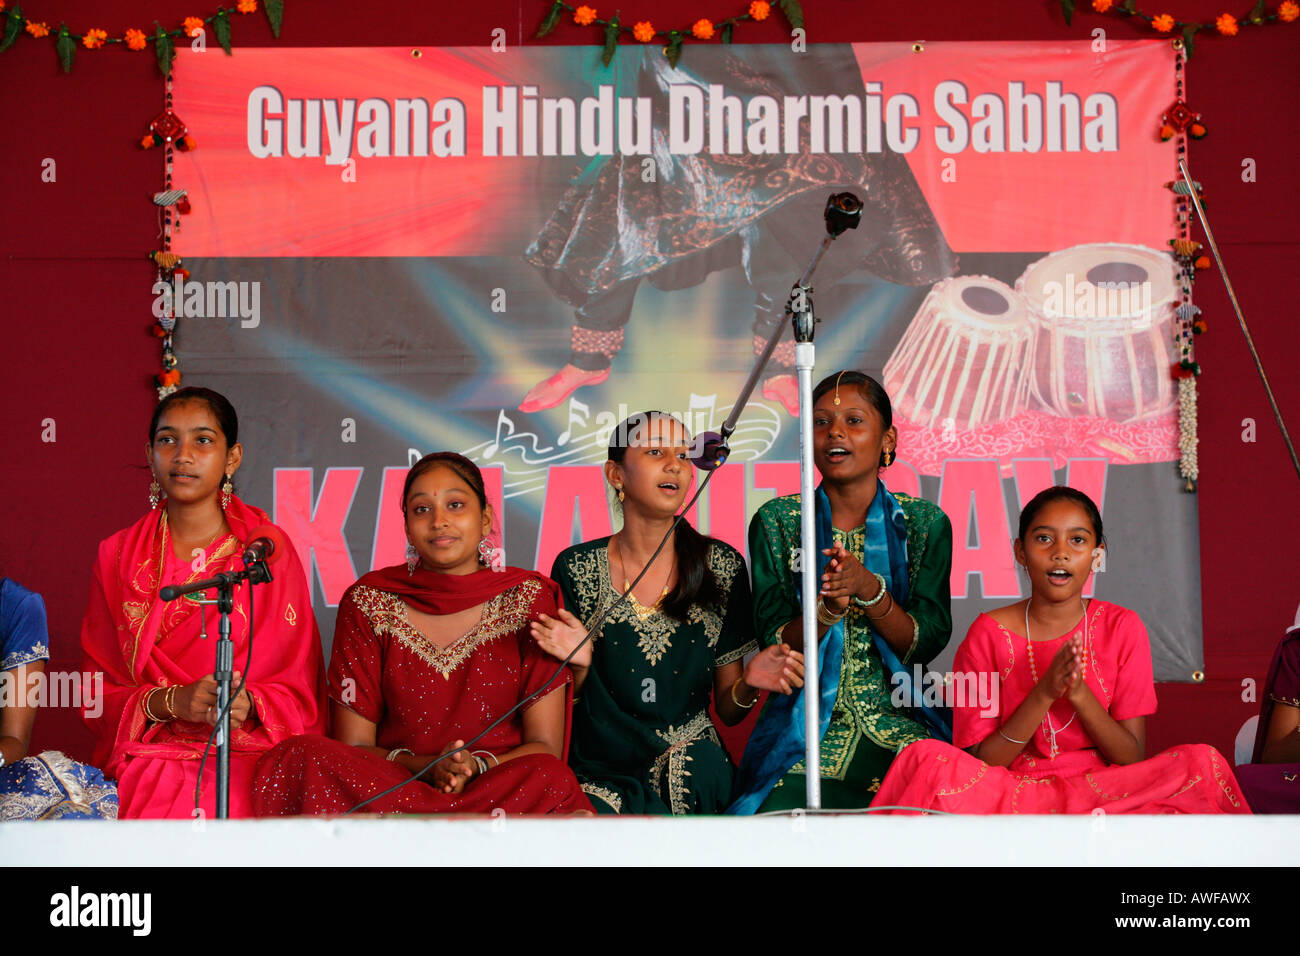 Musicians of Indian ethnicity at a Hindu Festival, Georgetown, Guyana, South America Stock Photo